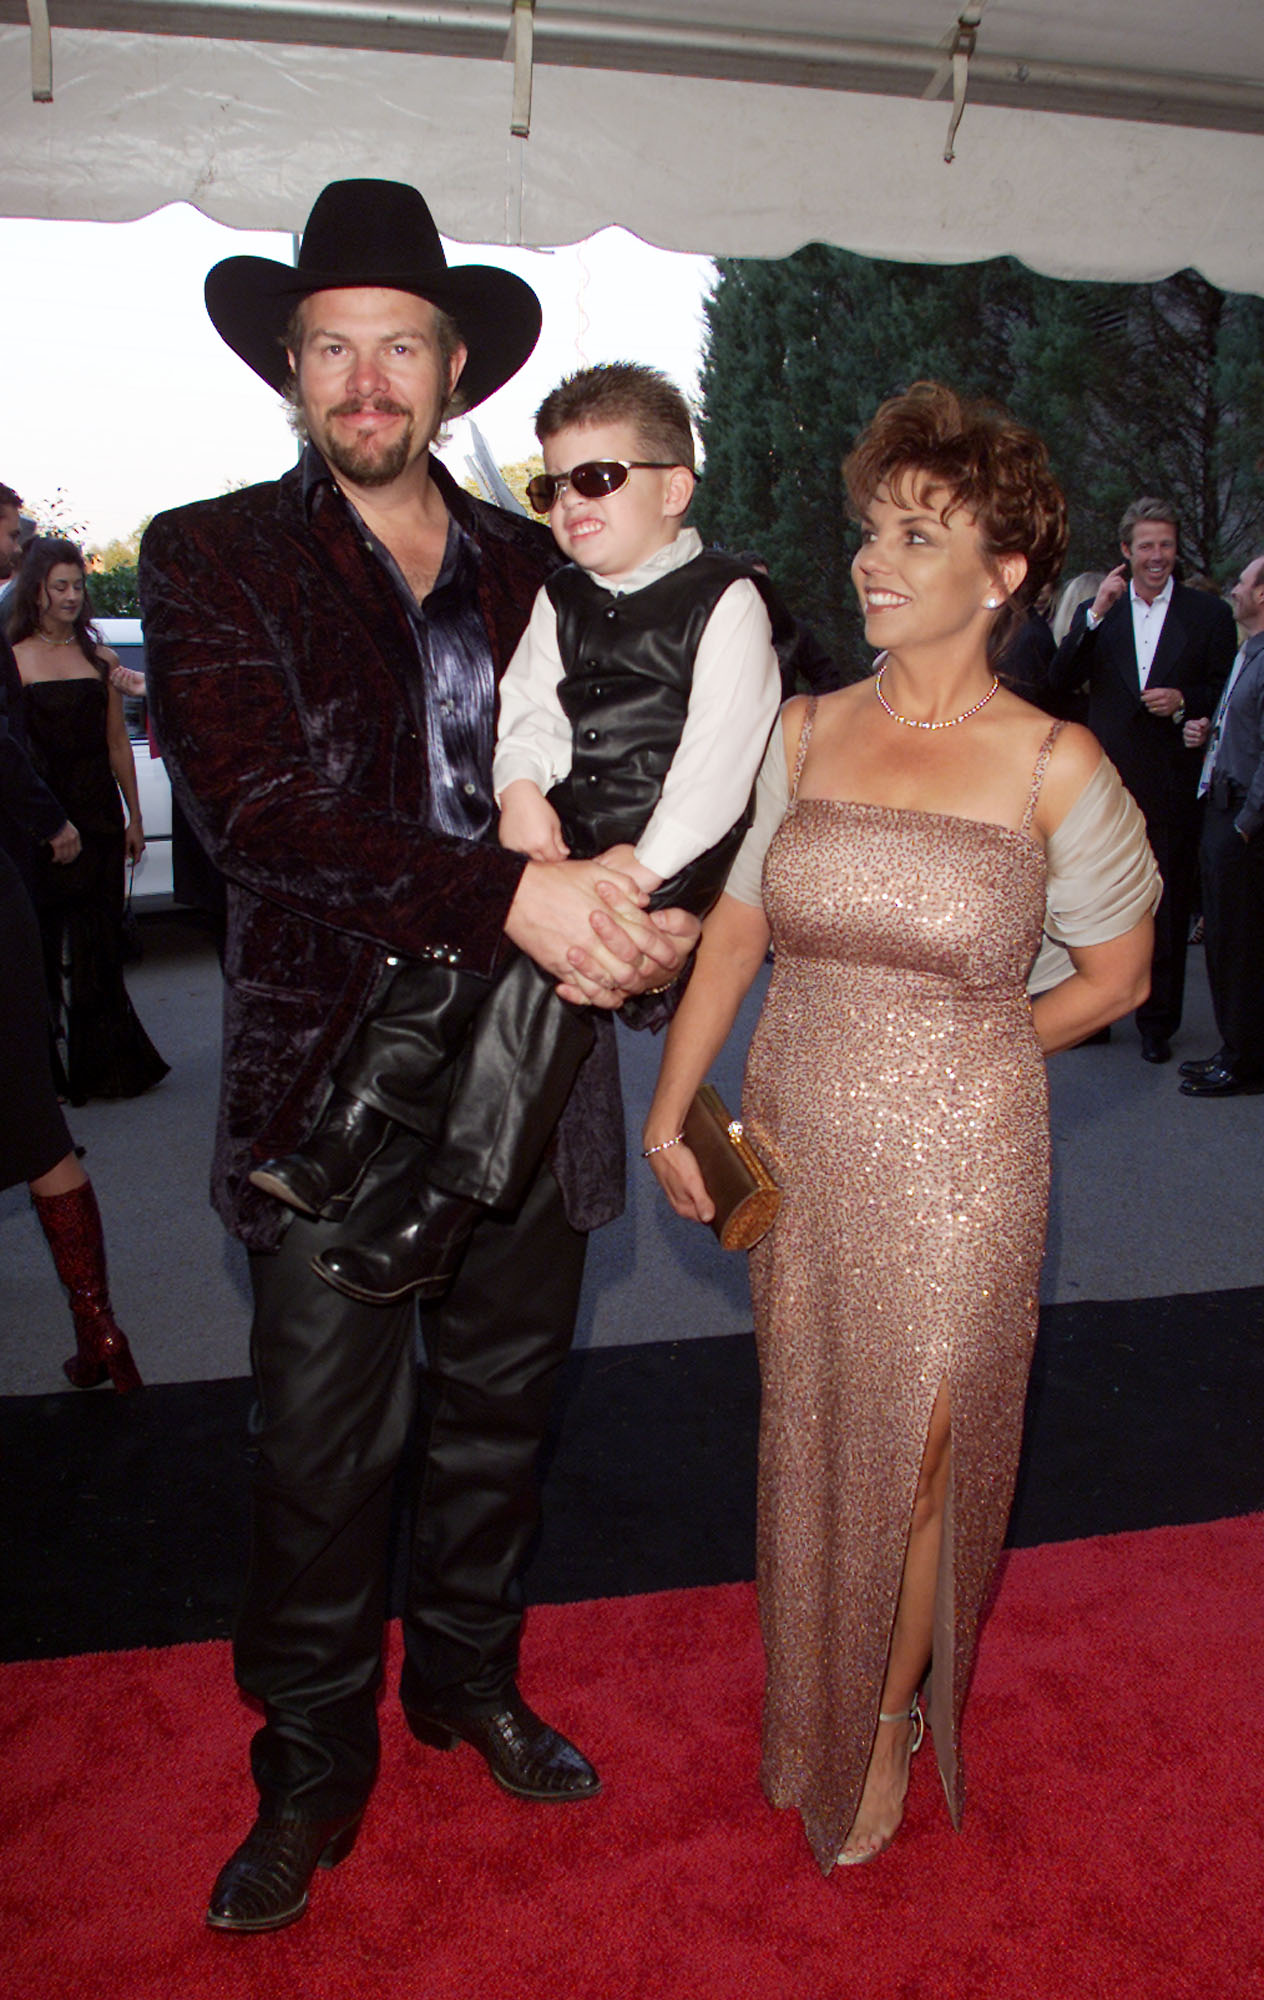 Toby Keith with wife Tricia and their son in Nashville in 2000 | Source: Getty Images